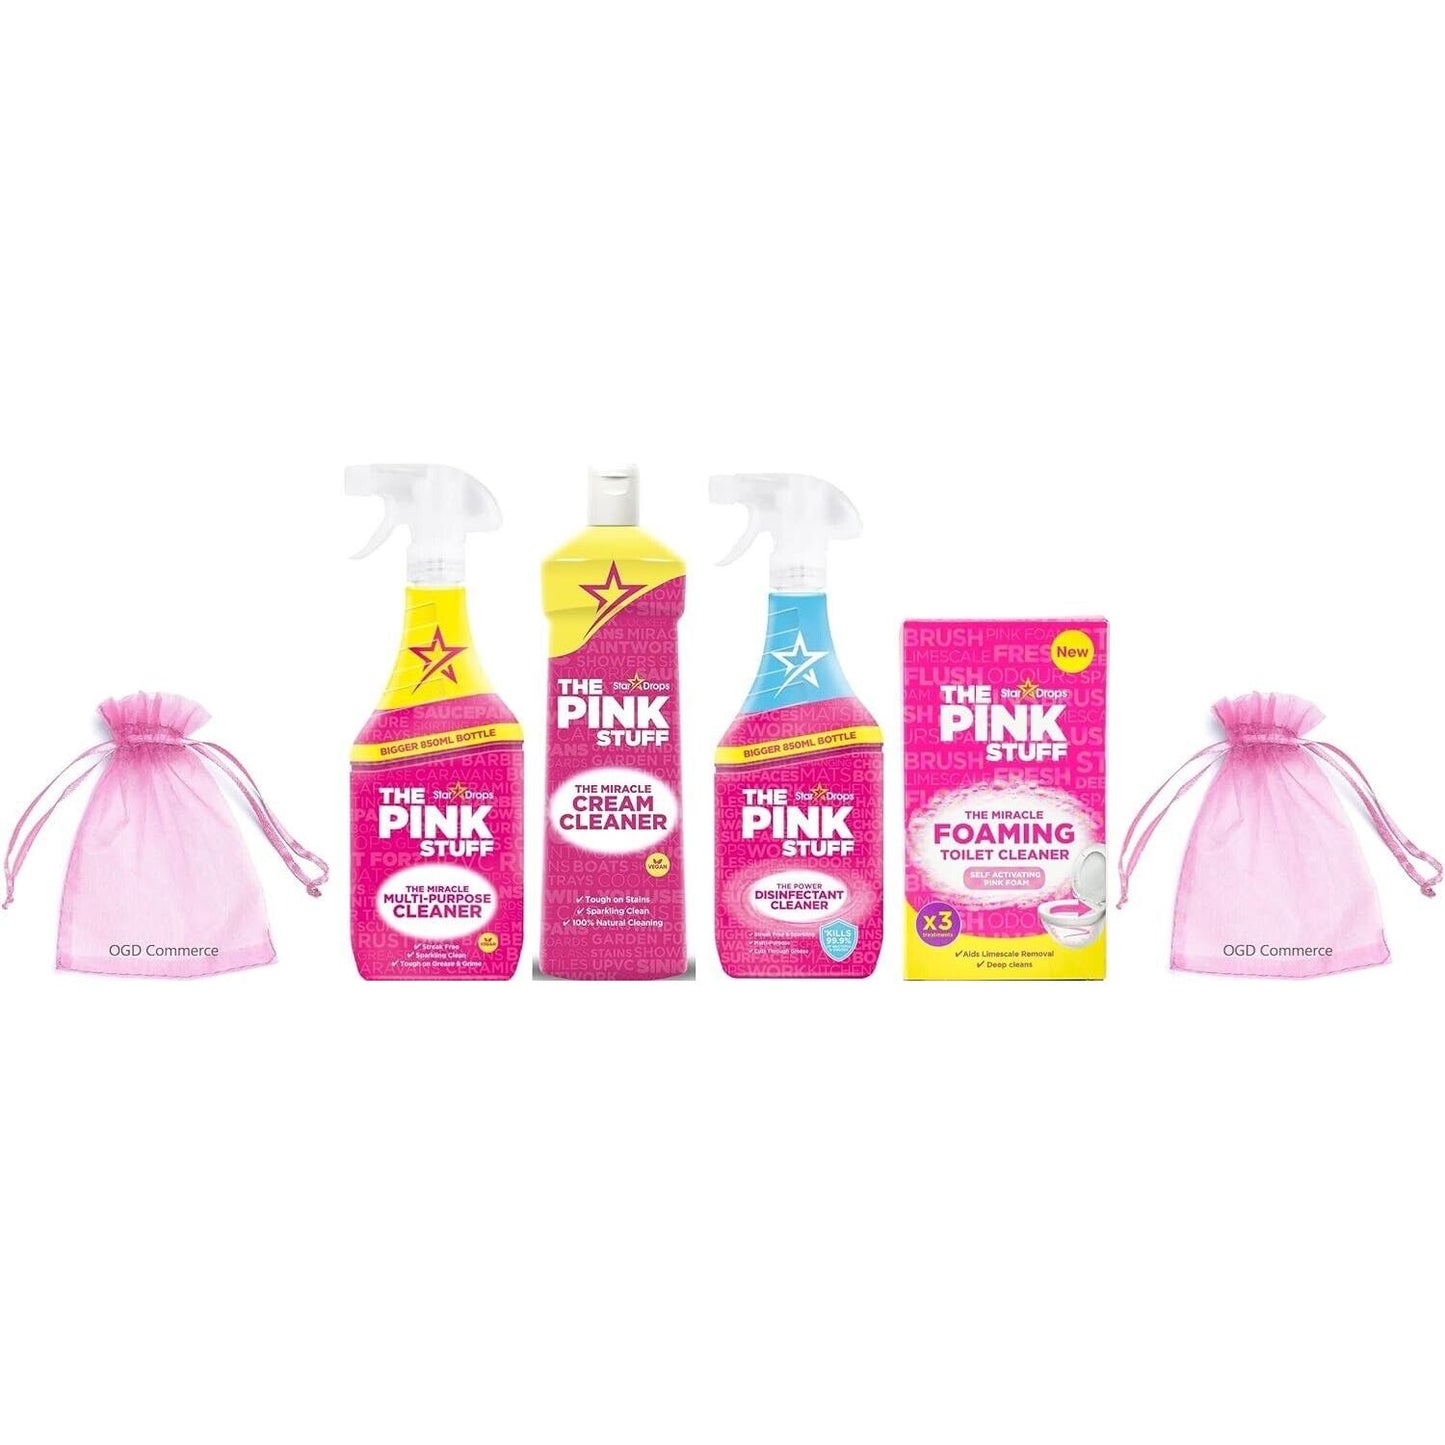 The Pink Stuff for Household cleaning bundle-Pack of 4